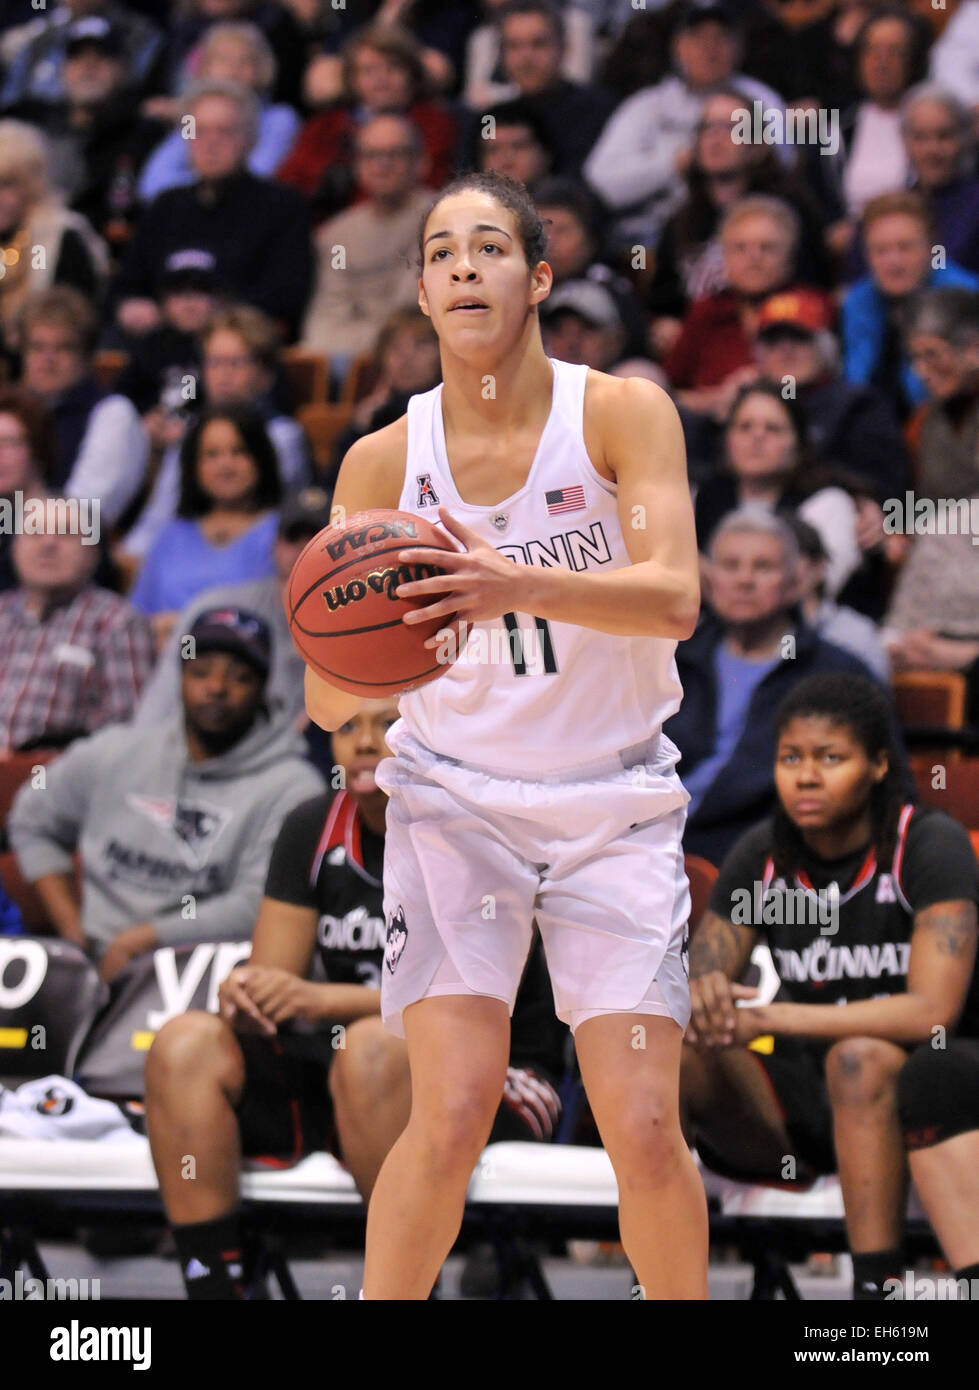 March 7th 2015: Kia Nurse(11) of Uconn in action during the NCAA American Conference Tournament Basketball game between the Connecticut Huskies and the Cincinnati Bearcats at Mohegan Sun Arena in Uncasville, CT. Gregory Vasil/CSM Stock Photo